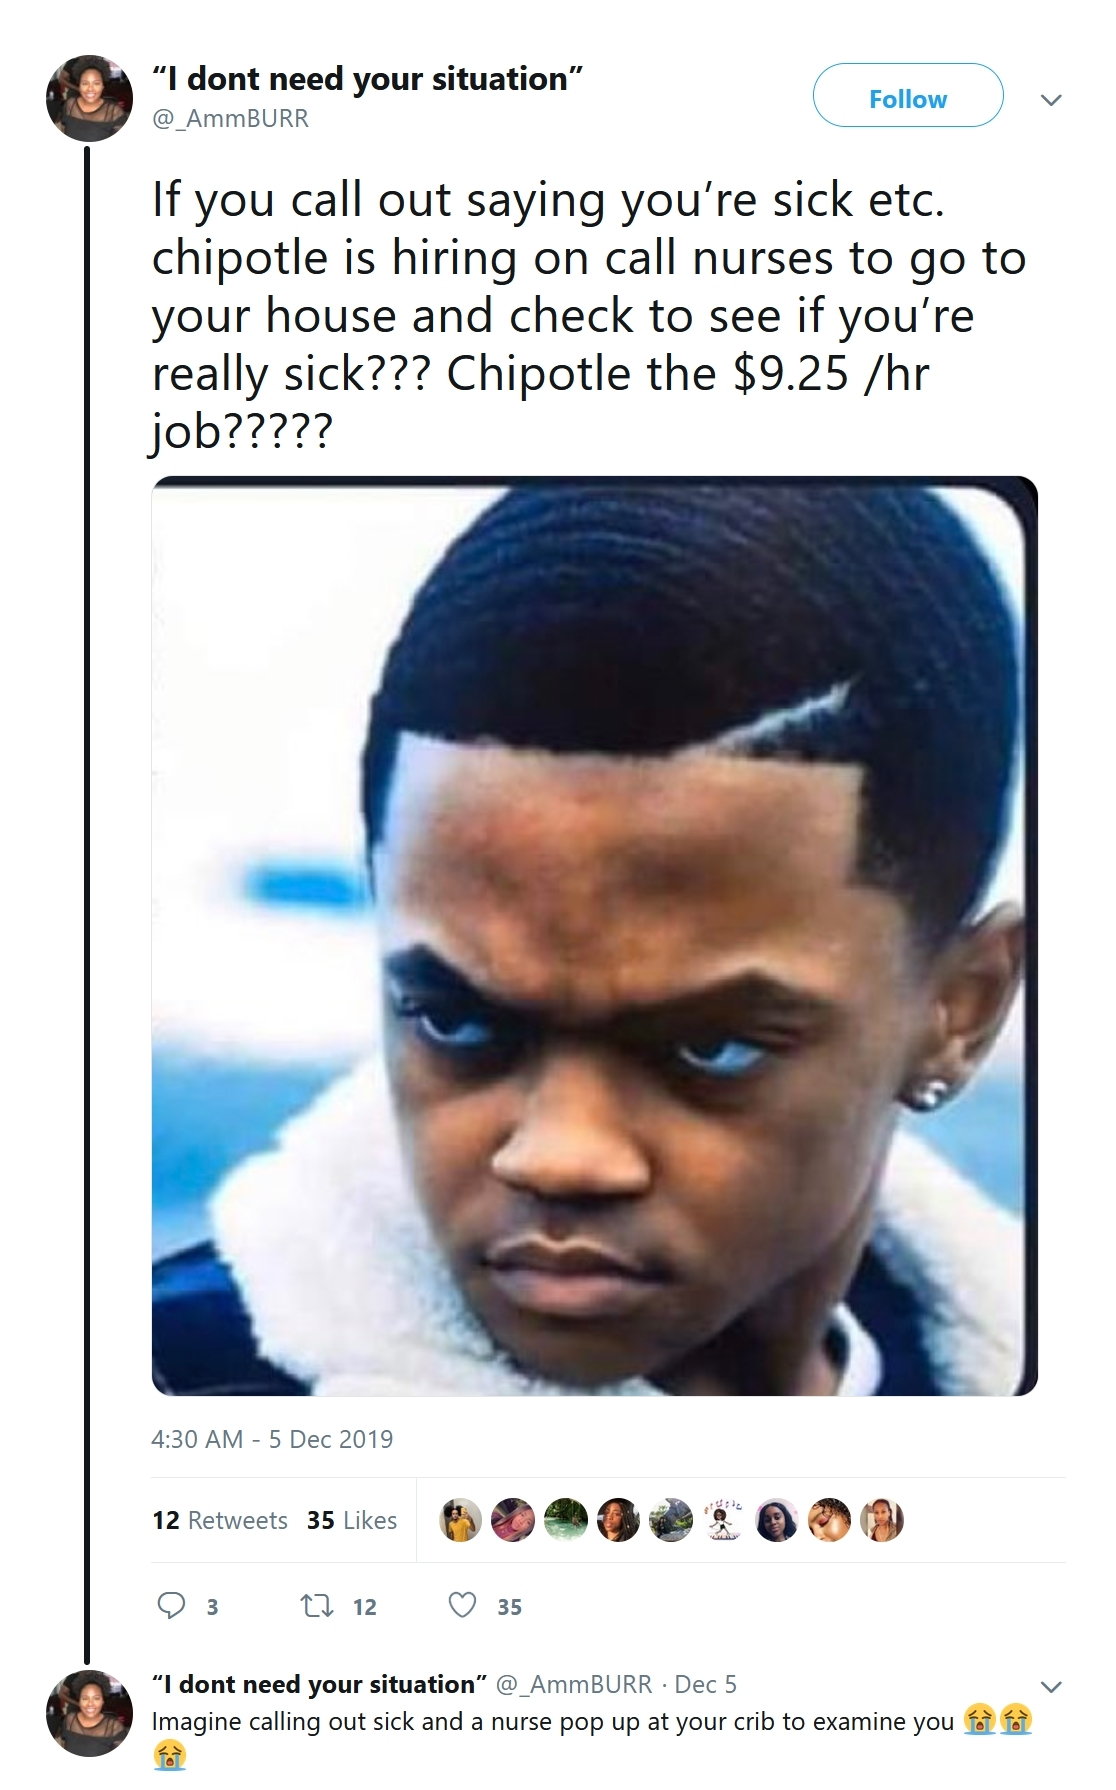 FunnyMike - "I dont need your situation" If you call out saying you're sick etc. chipotle is hiring on call nurses to go to your house and check to see if you're really sick??? Chipotle the $9.25 hr job????? 12 Ratwie 3 Oo O O 0 12 15 "I dont need your si